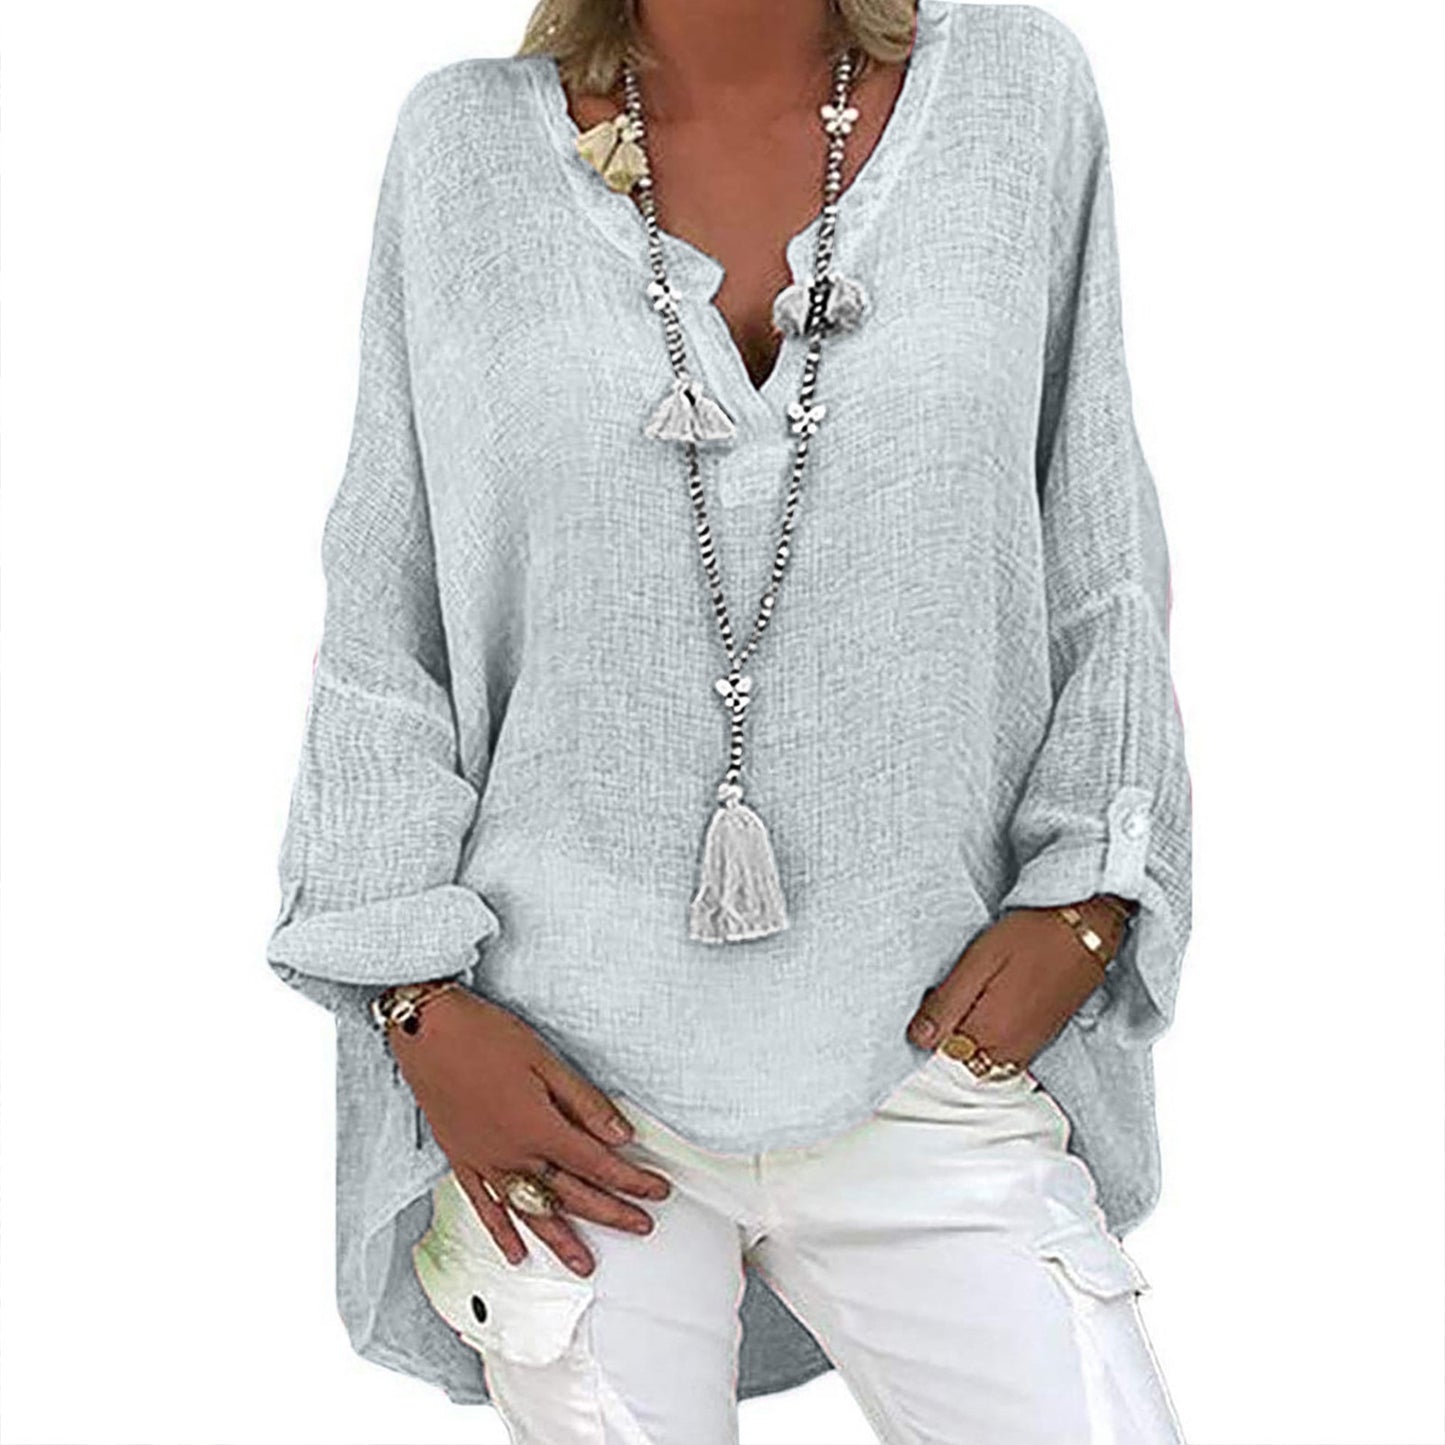 Oversized Casual Women's Tops Blouses Long Sleeve Shirts